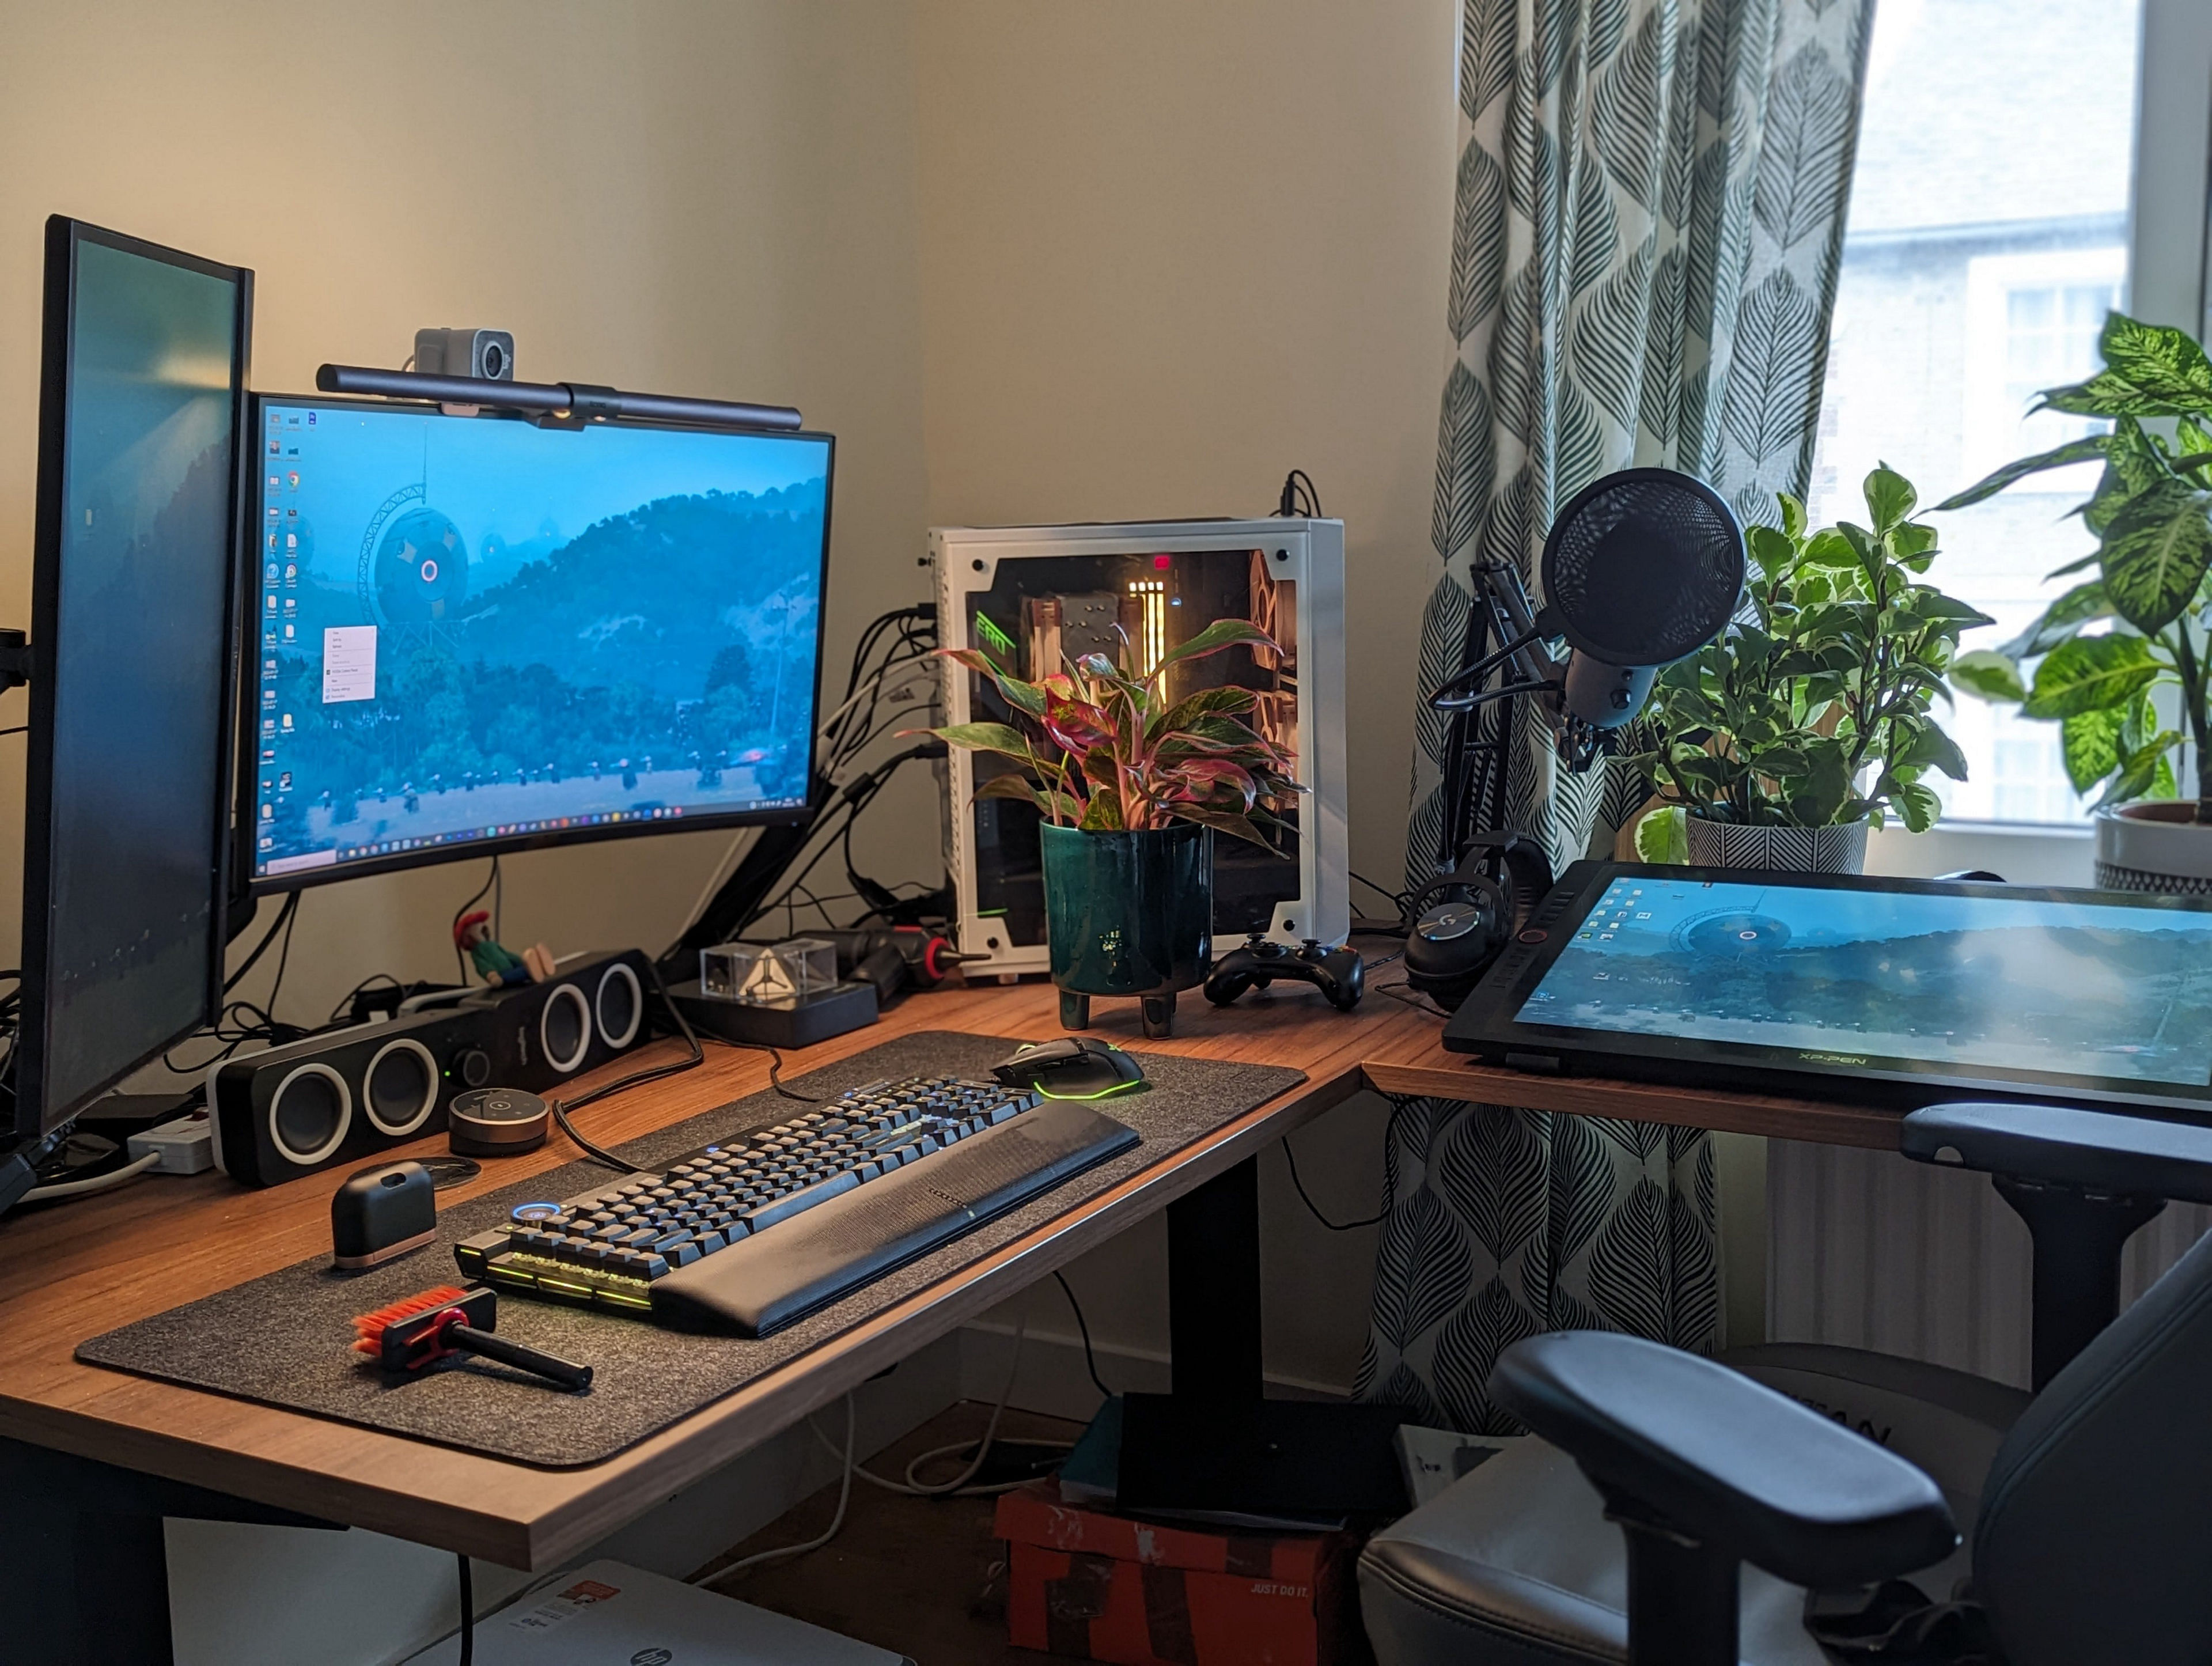 Arran Baker, one of the animators of Spider-Man: Across the Spider-Verse, arranged his home office with BenQ's ScreenBar Halo monitor light.